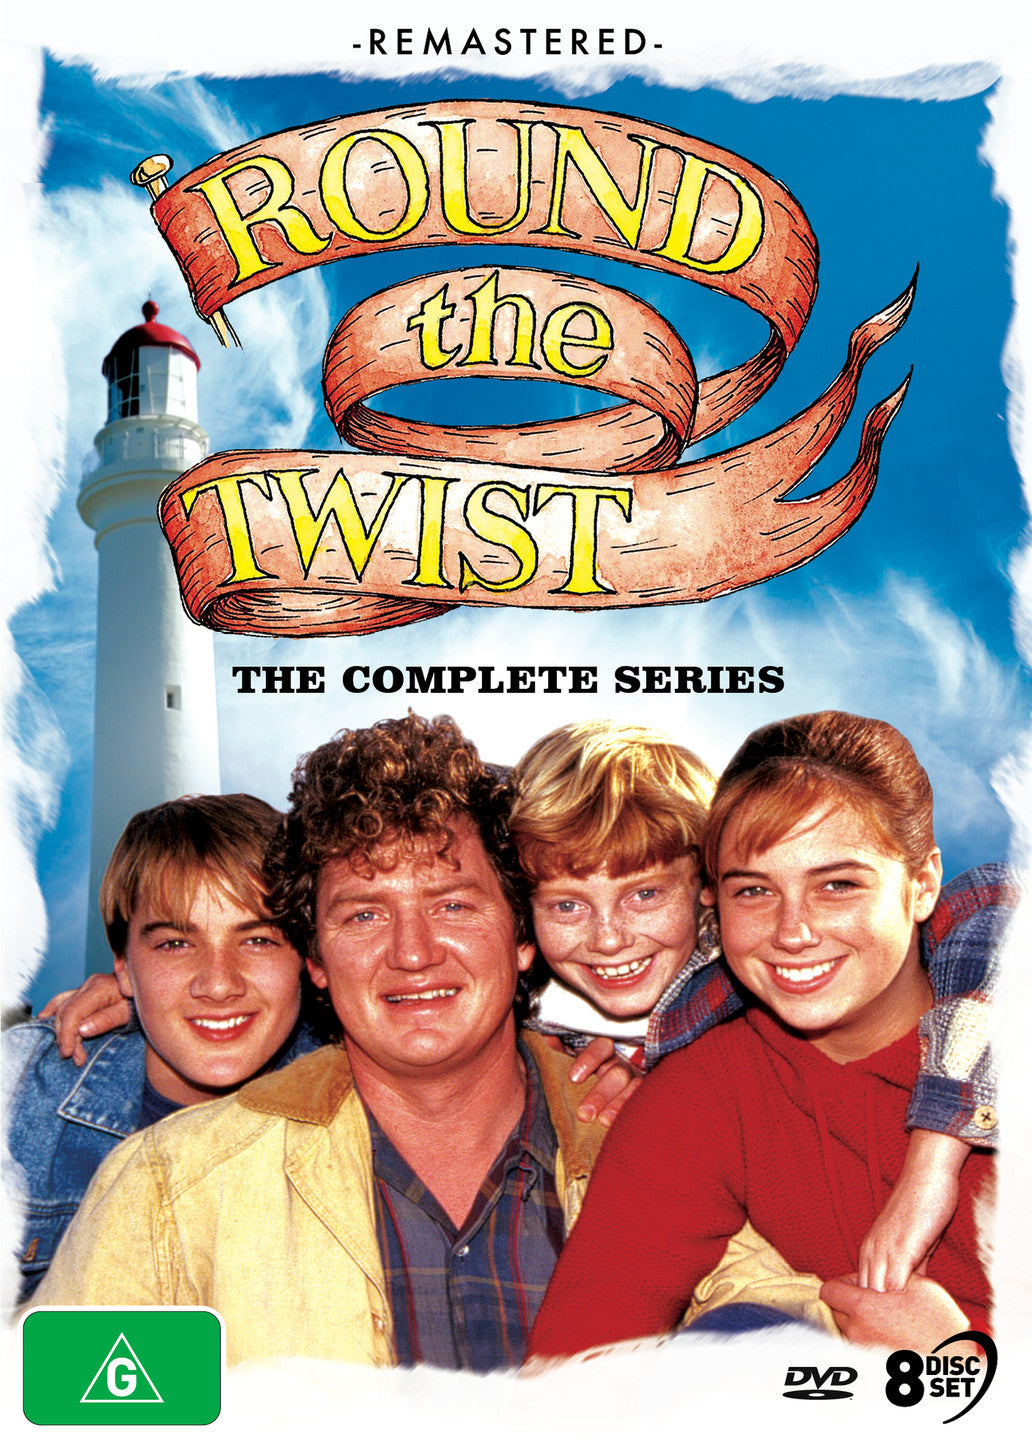 ROUND THE TWIST: THE COMPLETE SERIES (REMASTERED)